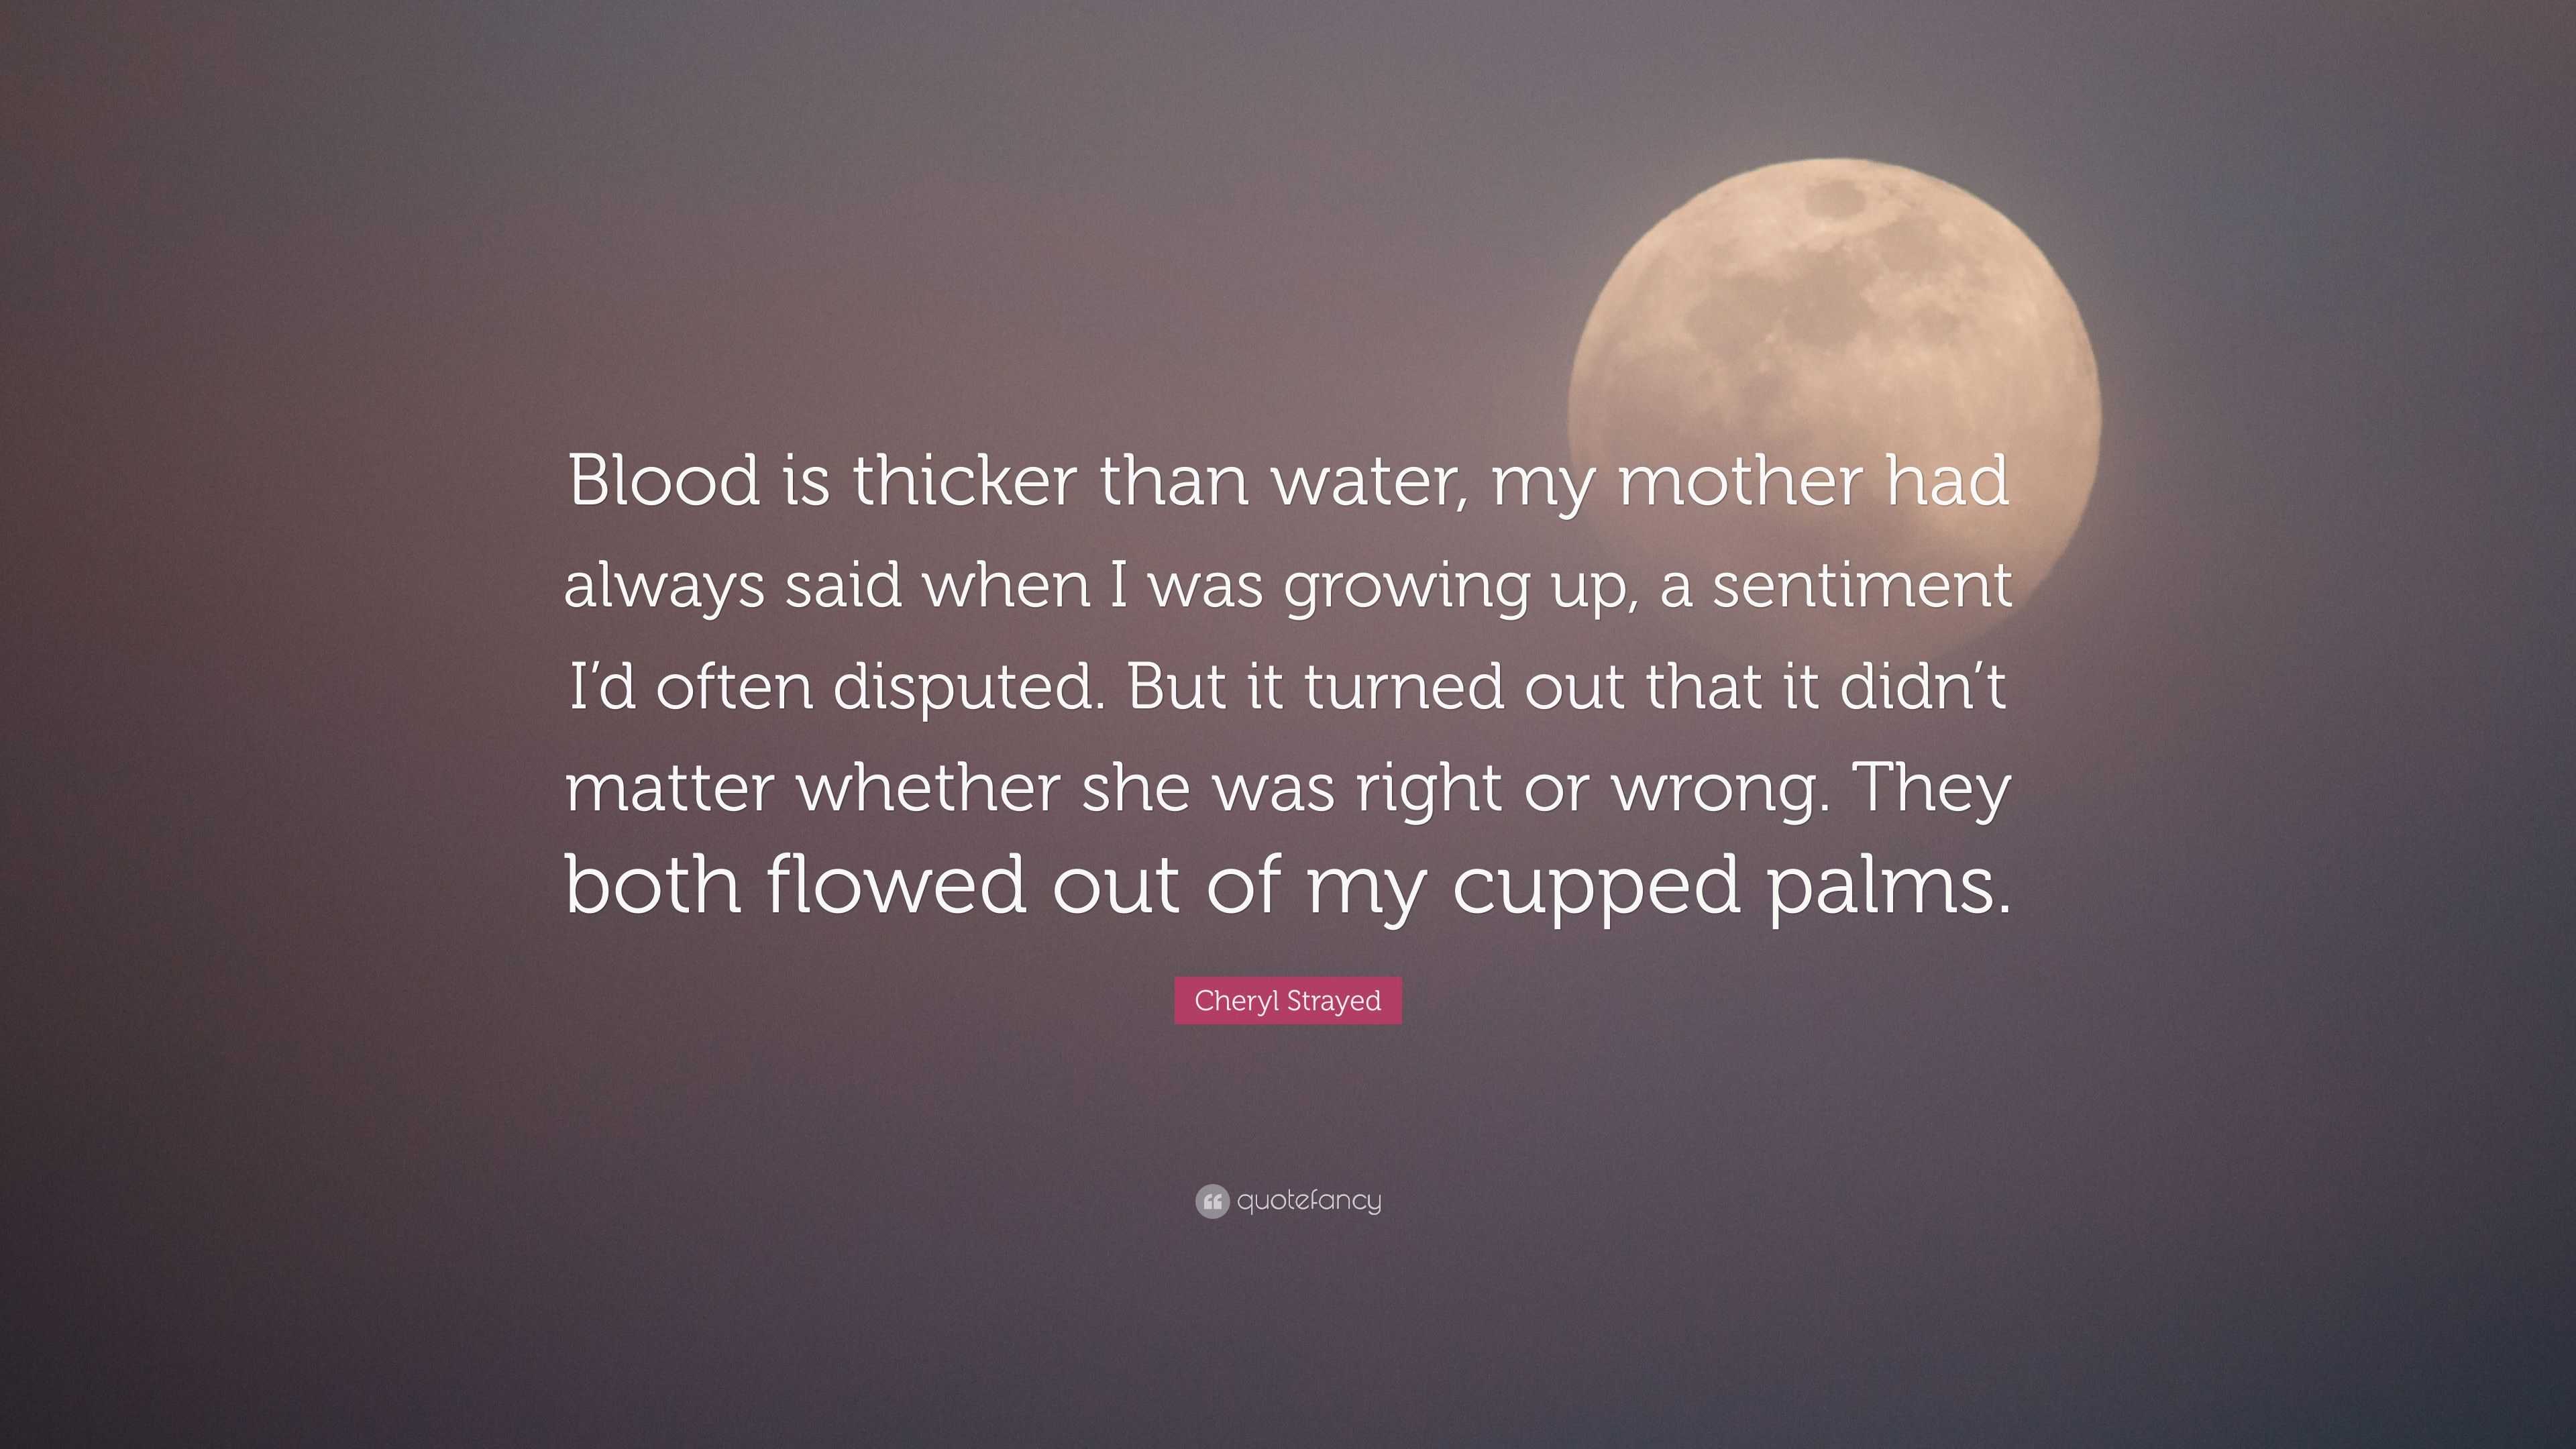 an essay on blood is thicker than water